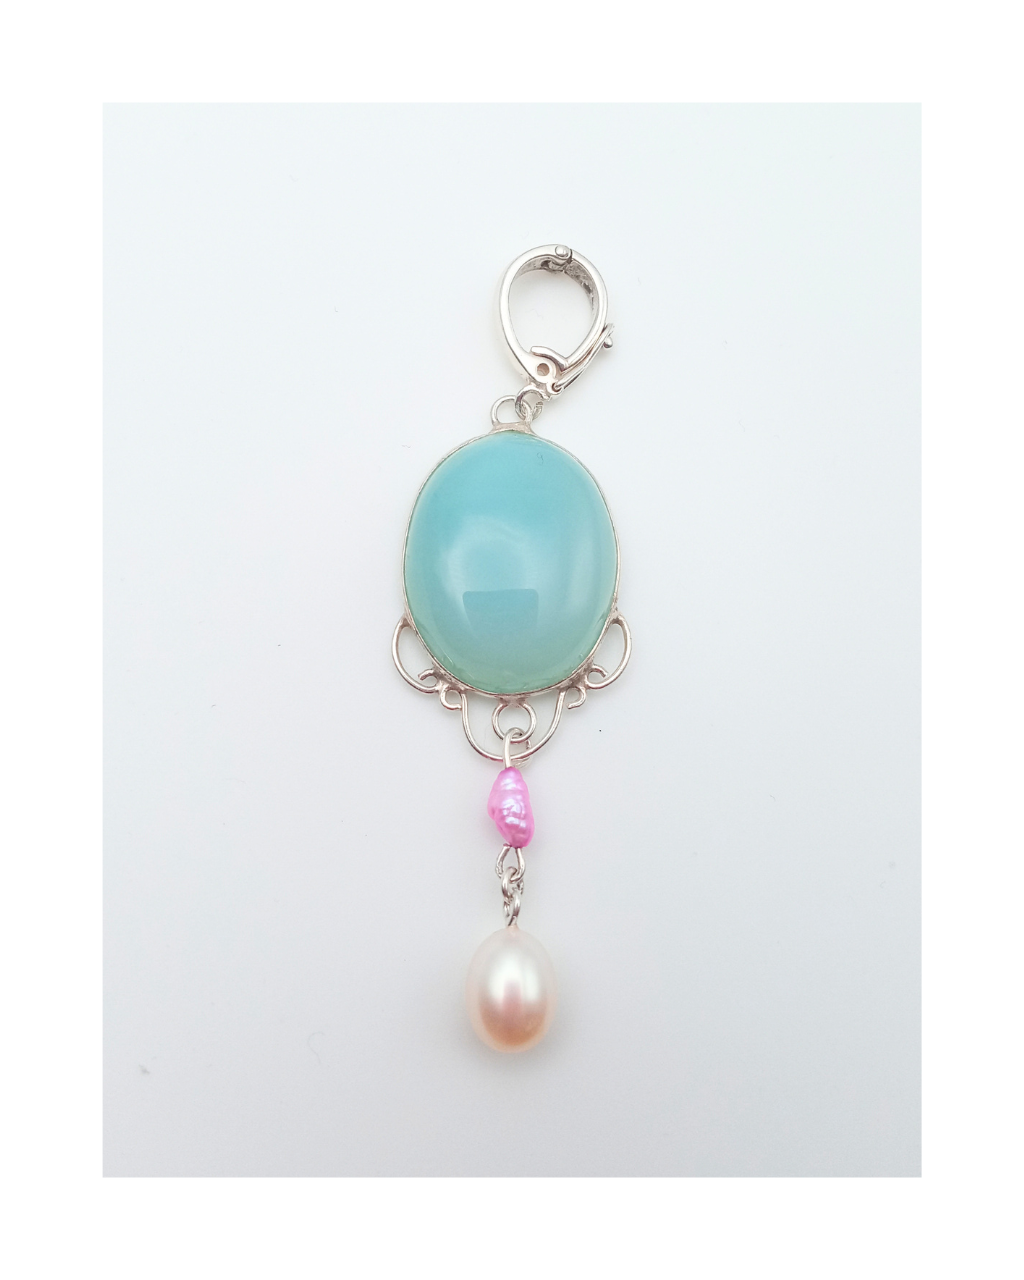 Dreamy Blue Oval Chalcedony with Pink, Peach Pearls Sterling Silver Enhancer Pendant Approx. 2 3/4"L X 3/4". ONE ONLY.